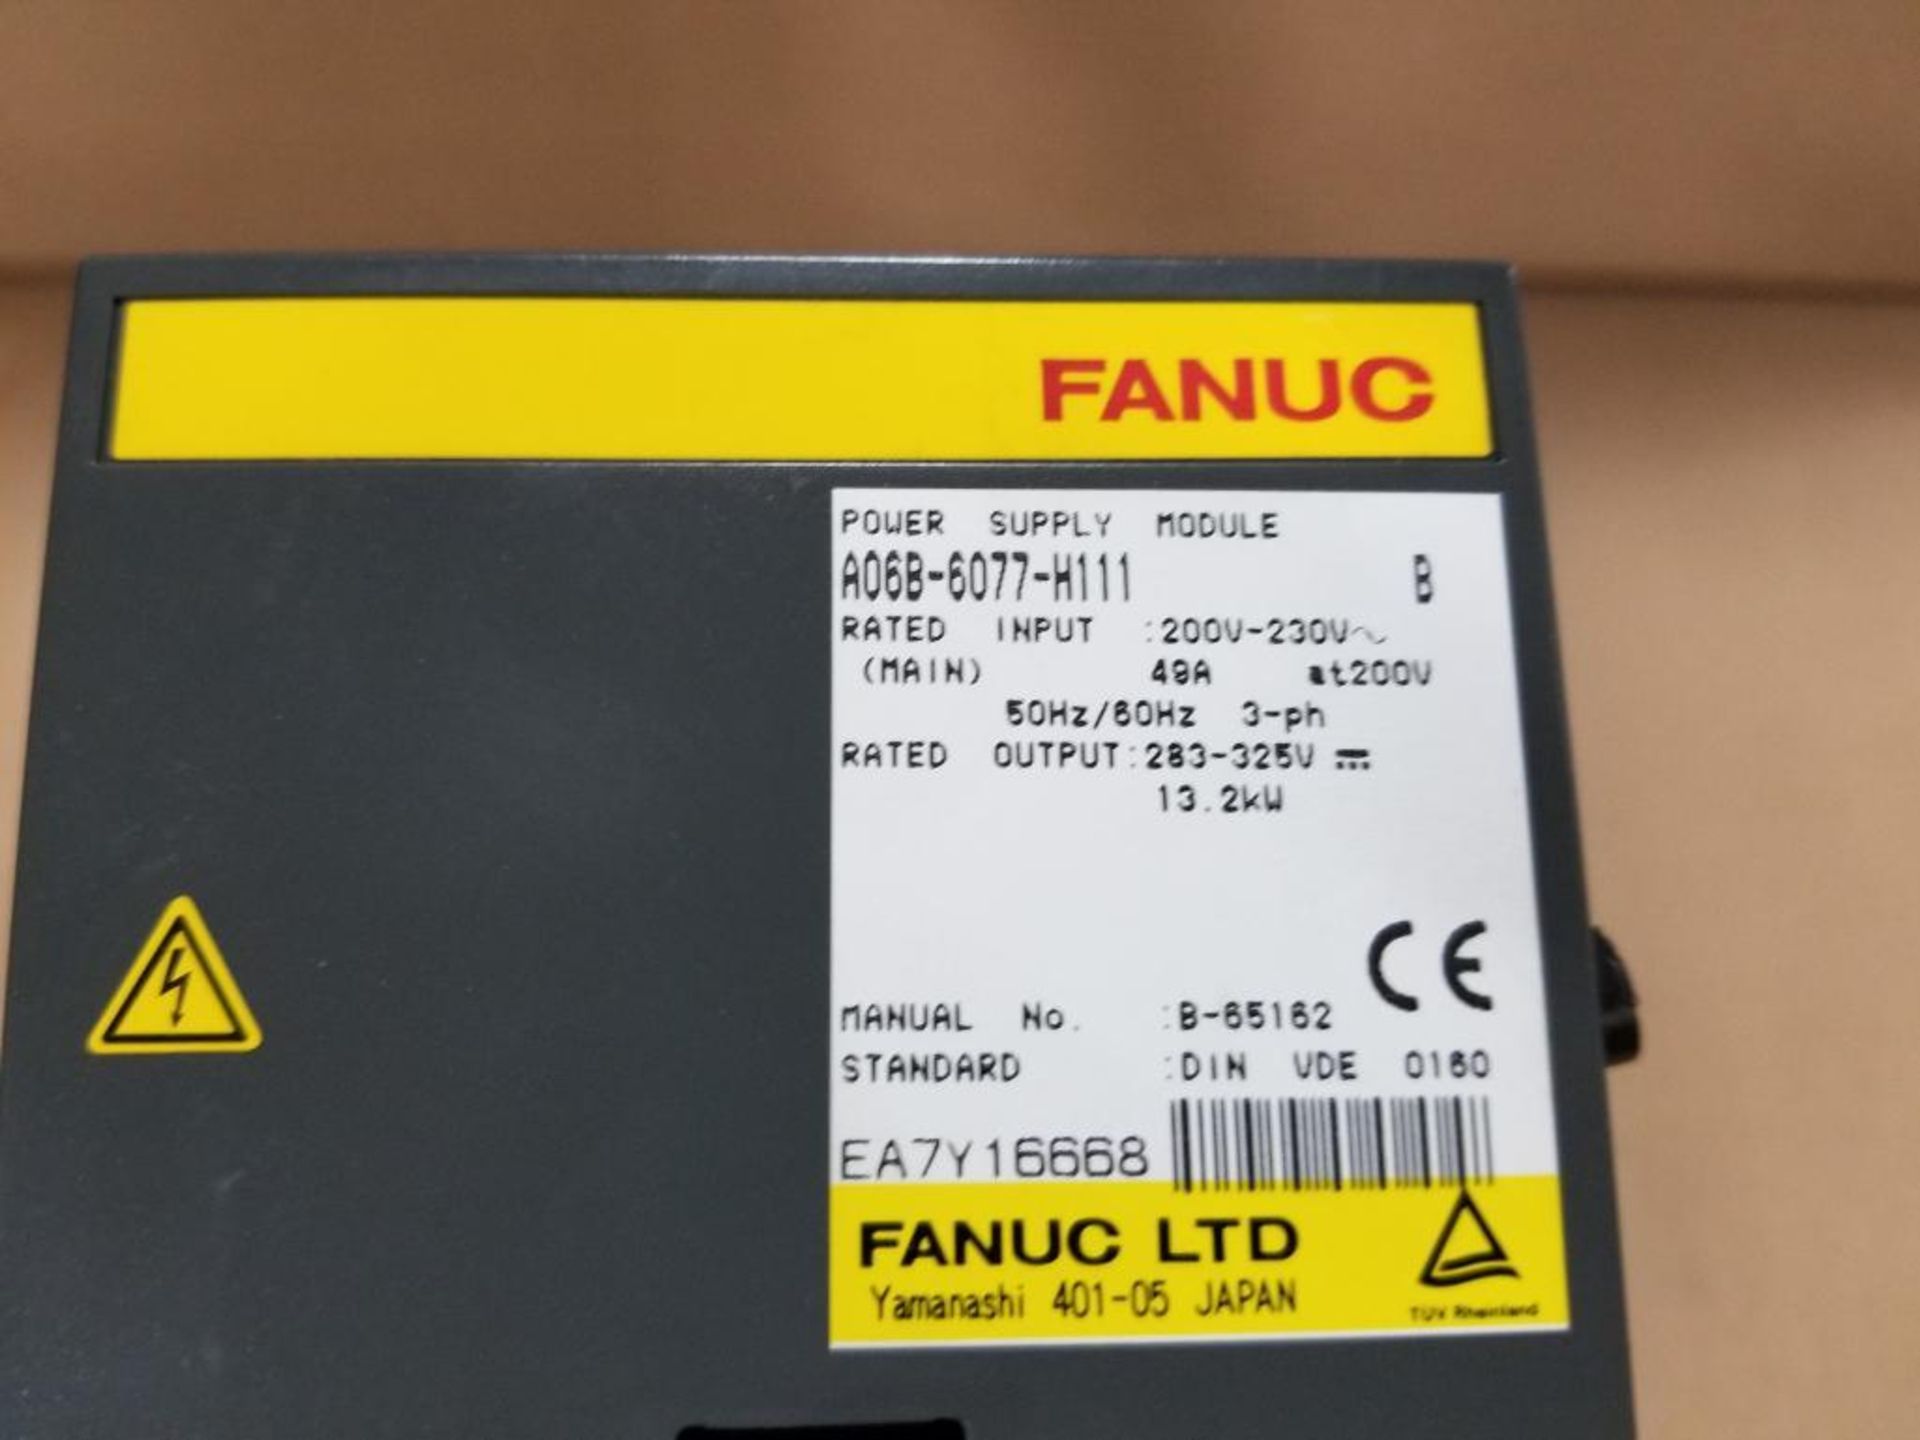 Fanuc A06B-6077-H111 power supply module. 13.2kW output. - Image 4 of 8